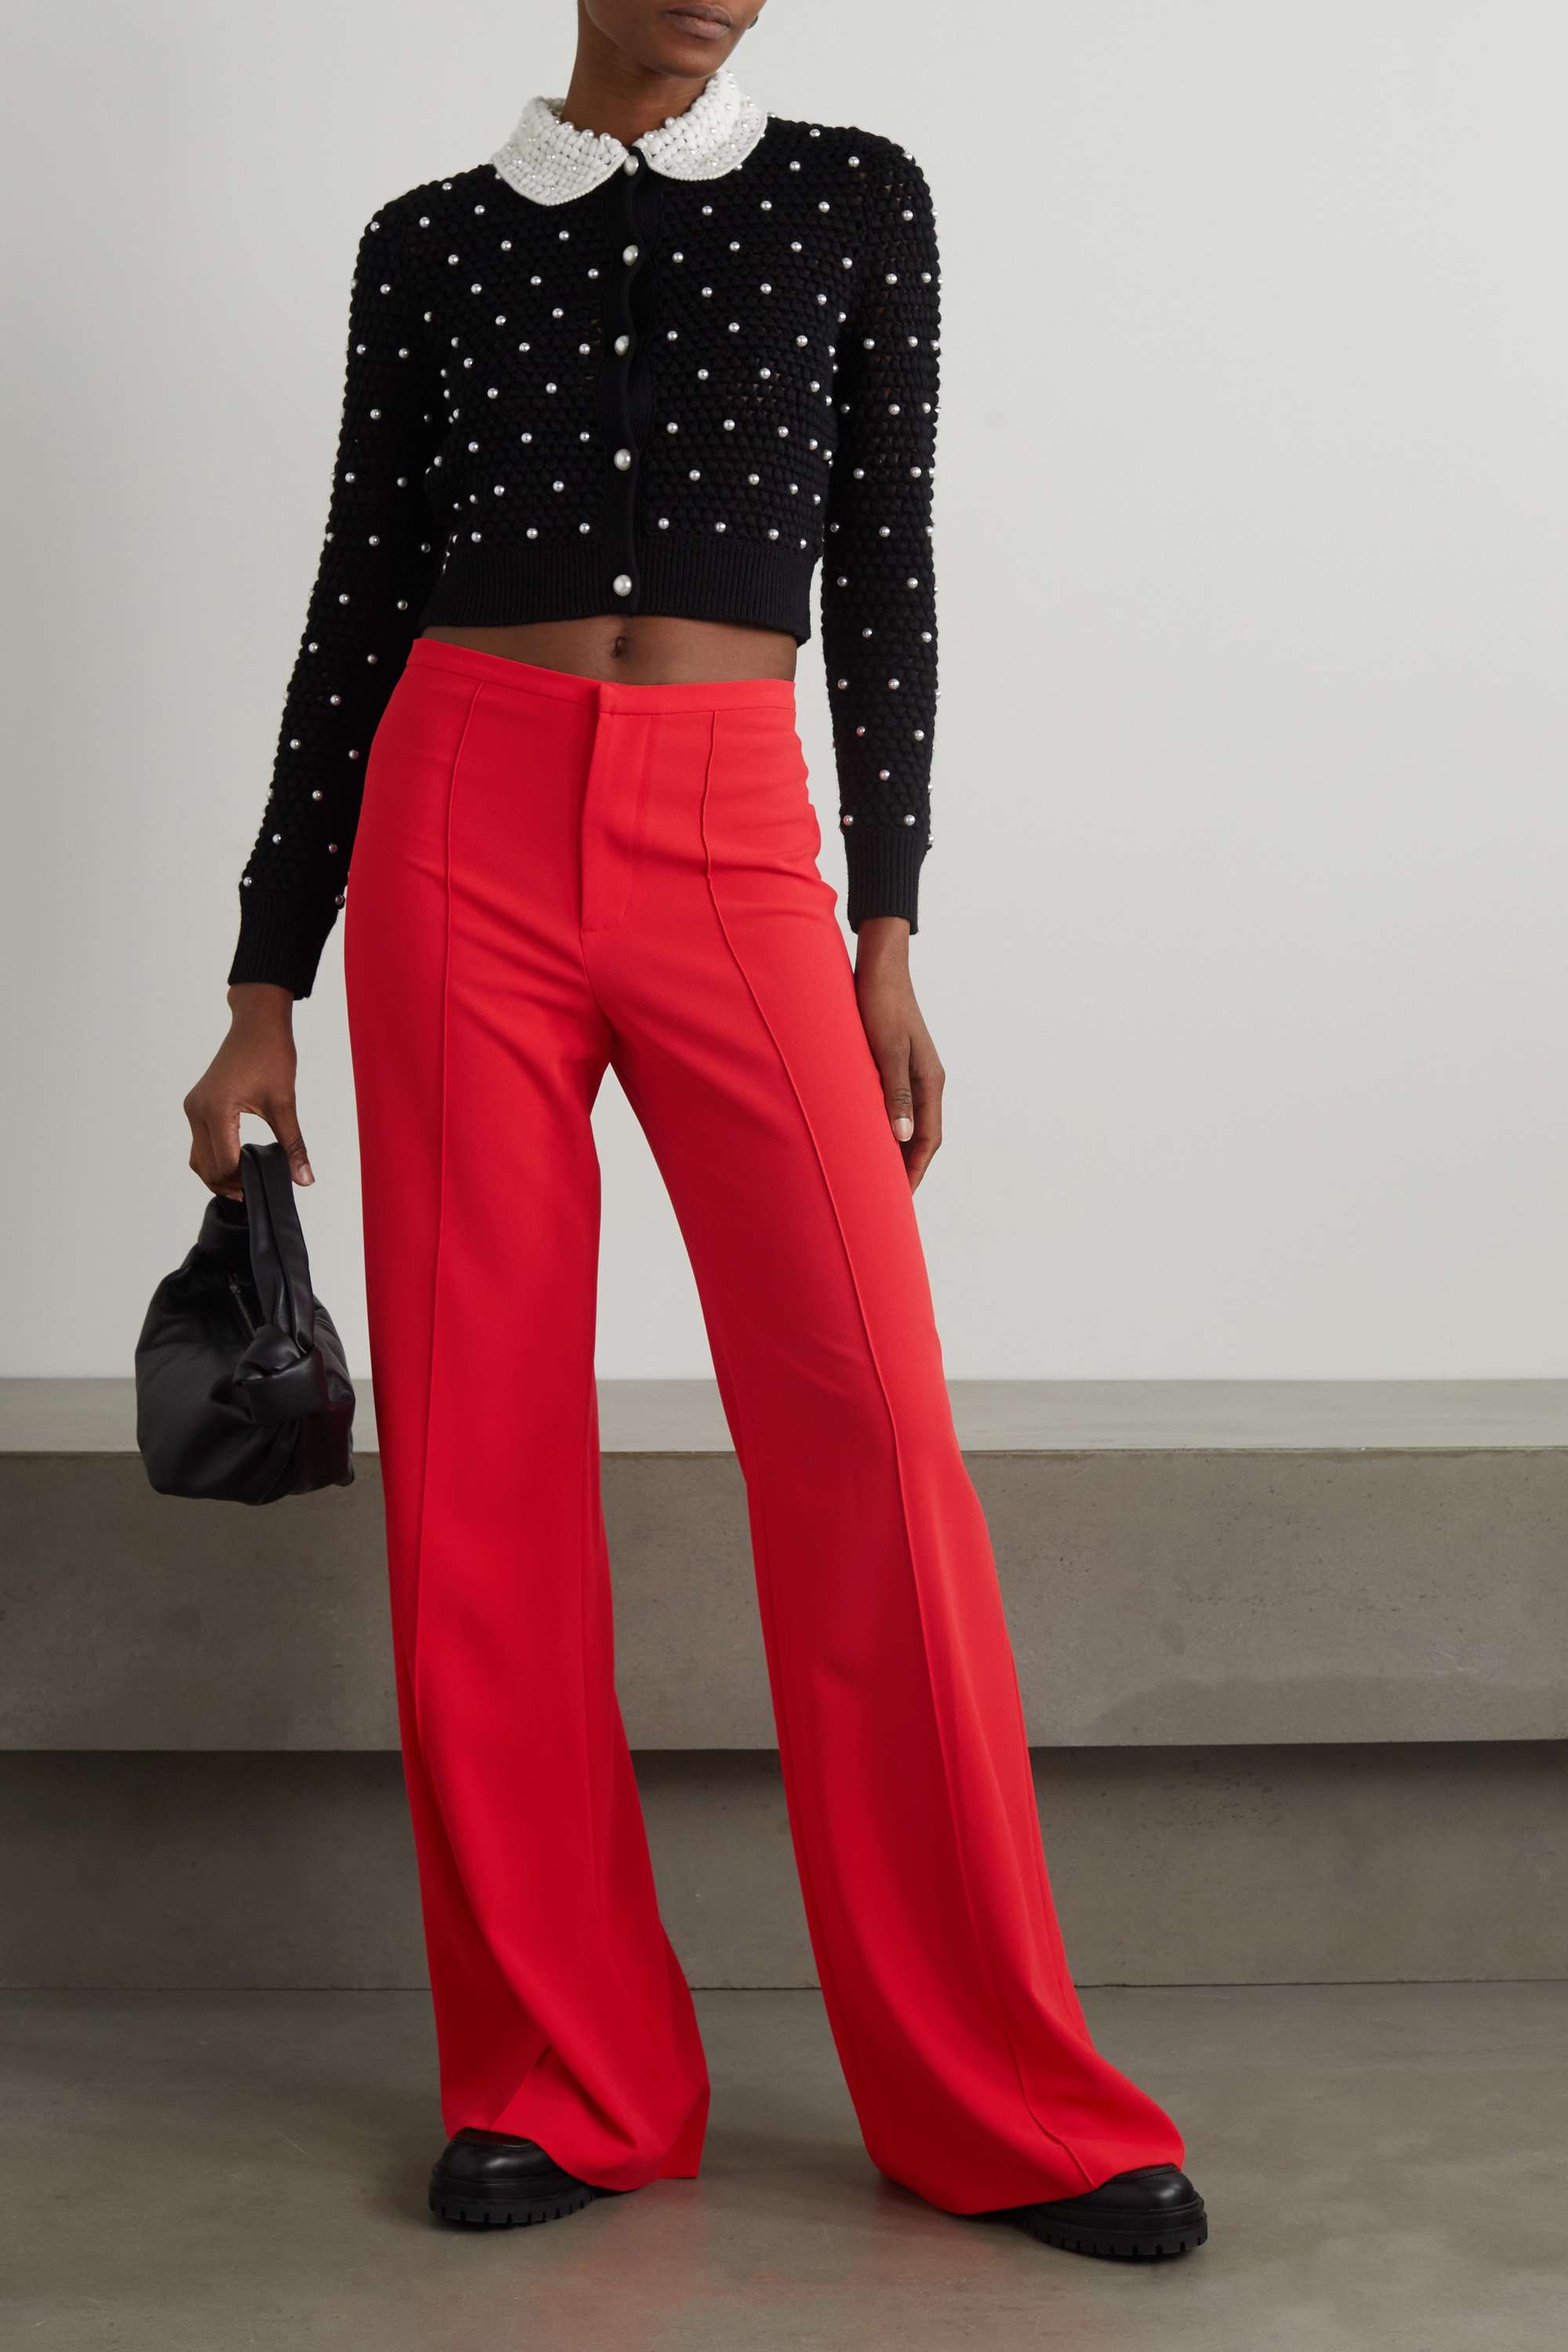 7 Chic Ways to Wear Red Pants in 2022 | What Wear